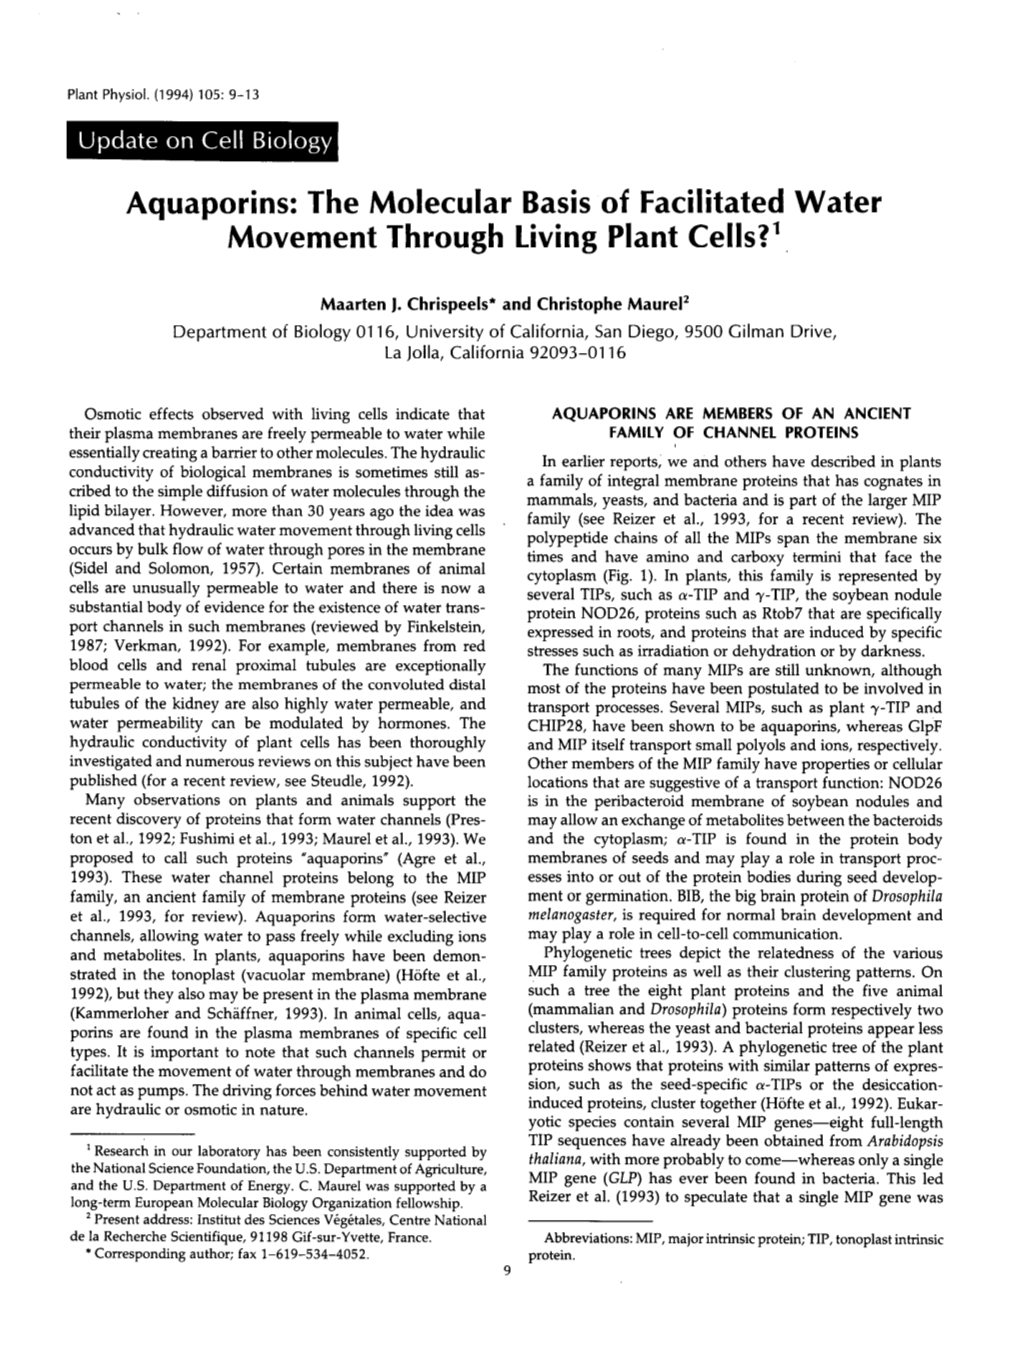 Aquaporins: the Molecular Basis of Facilitated Water Movement Through Living Plant Cells?'